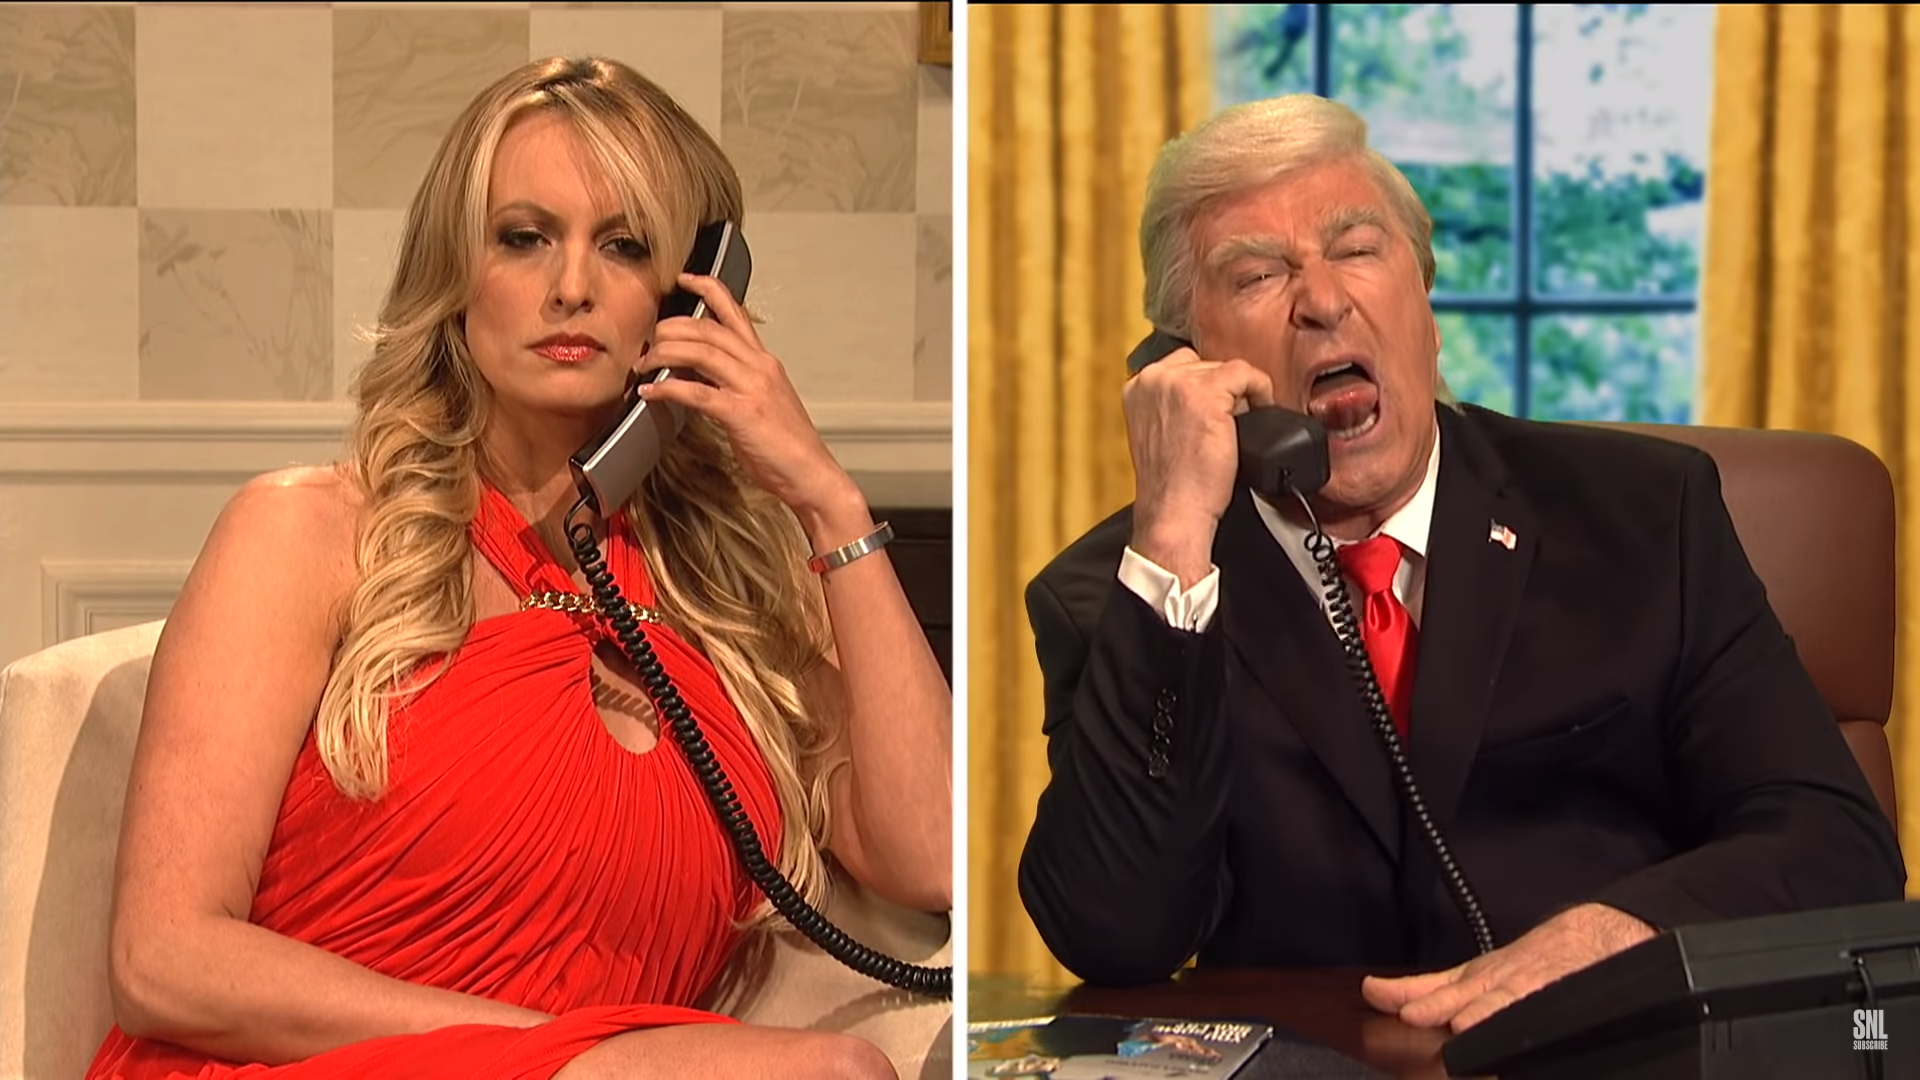 Stormy Daniels and Alec Baldwin on SNL